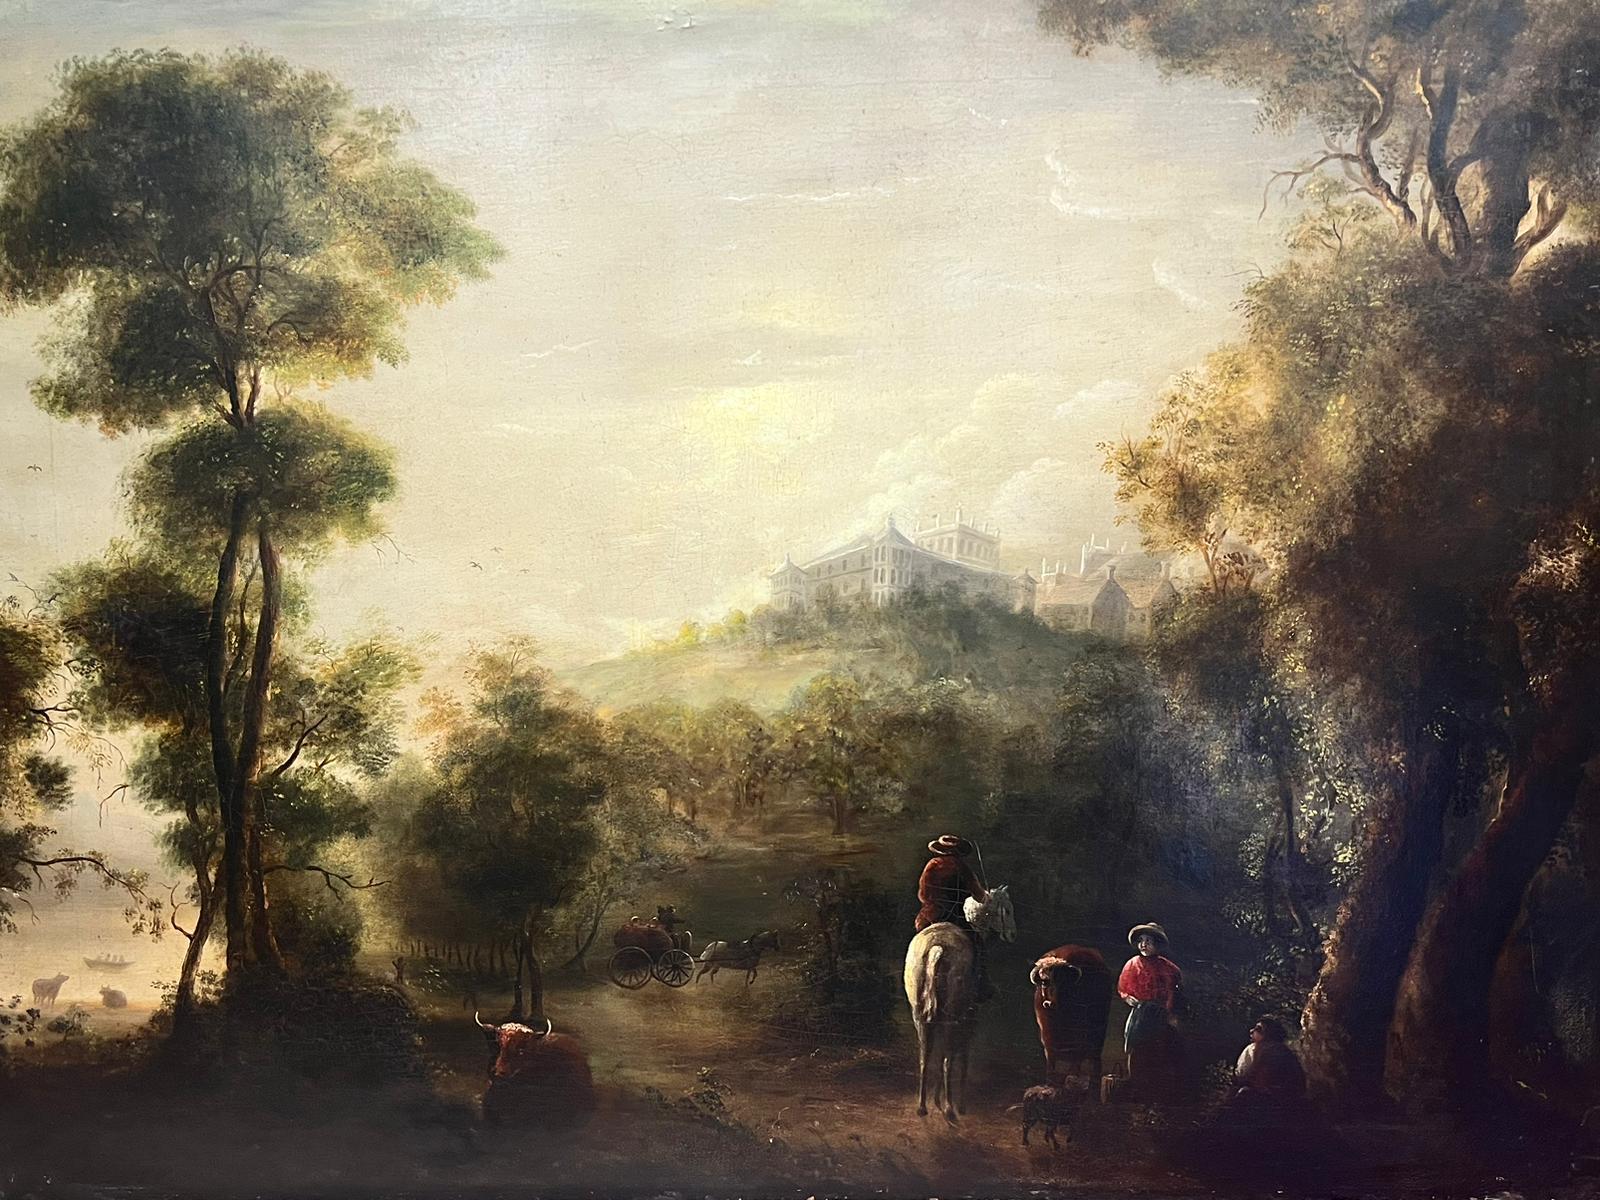 English Old Master Landscape Painting - Huge 18th Century Oil Painting Classical Landscape Ancient Castle with Figures